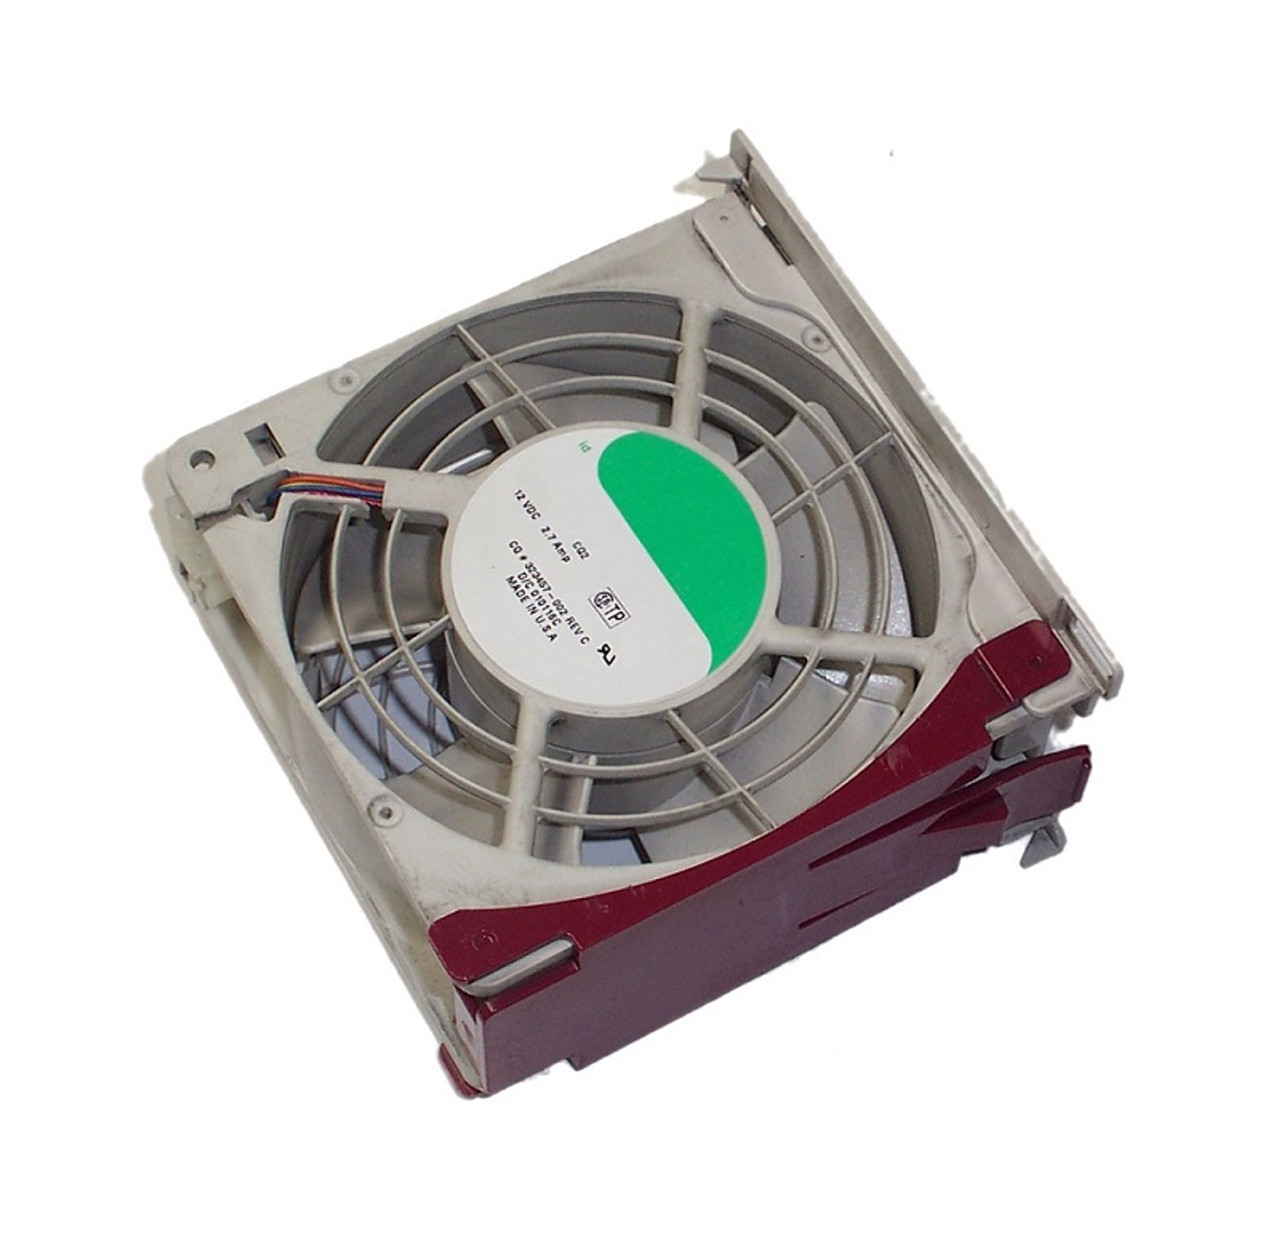 3651R - Dell 119MMX119MM Fan for PowerVault 210S